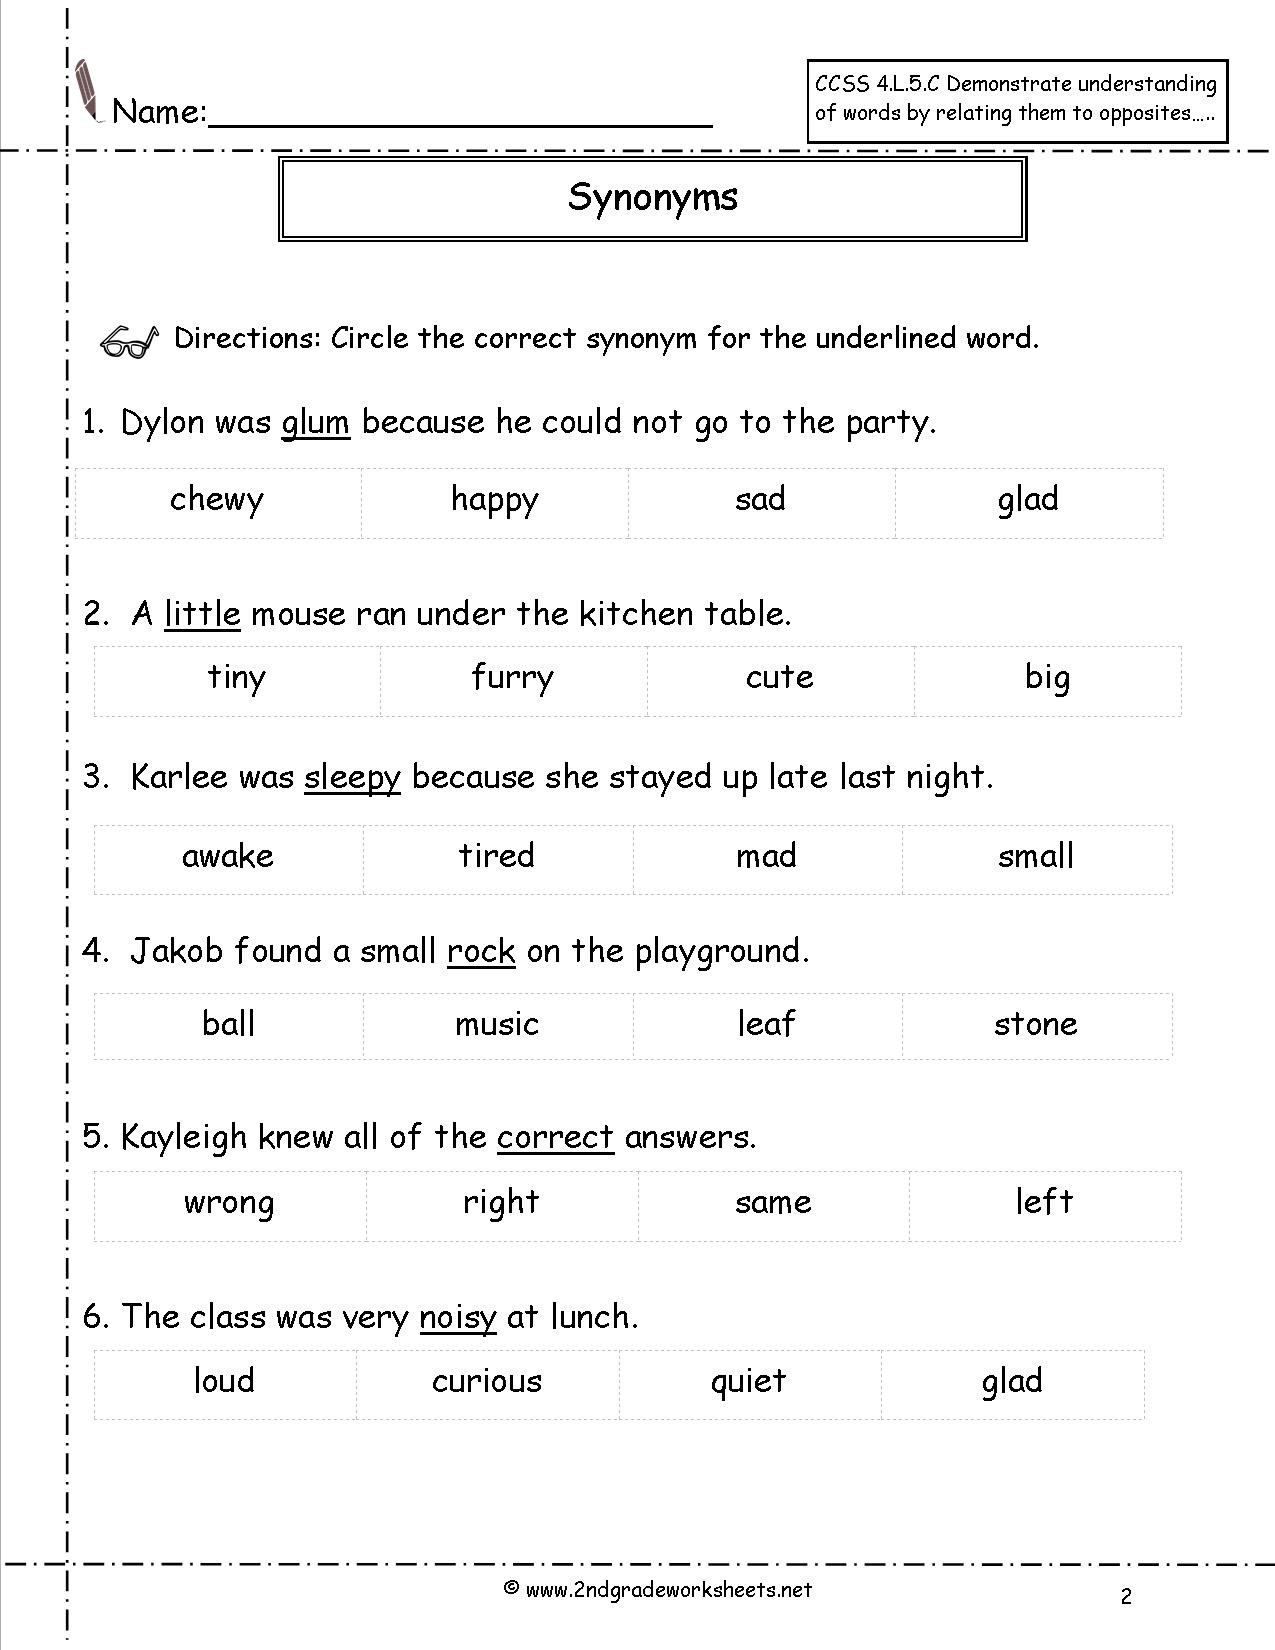 Antonyms Worksheets 3rd Grade Synonyms and Antonyms Worksheets Antonym for Third Grade